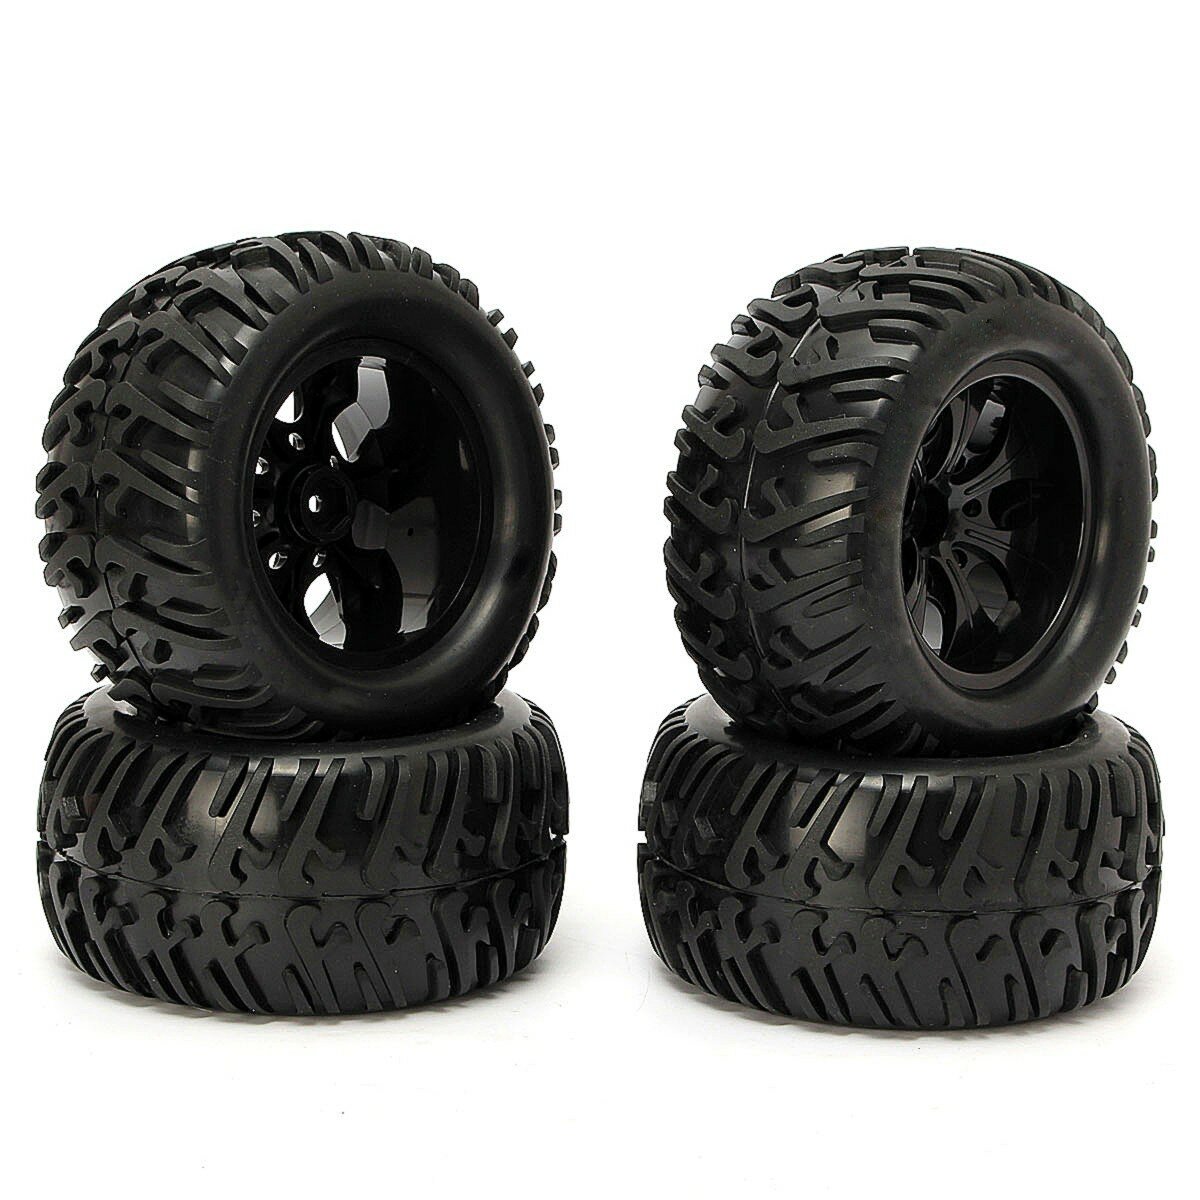 Details about   RC Double style Tires & Star Spoke Yellow Wheel F/R 4P For HSP 1/10 Off-Road Bug